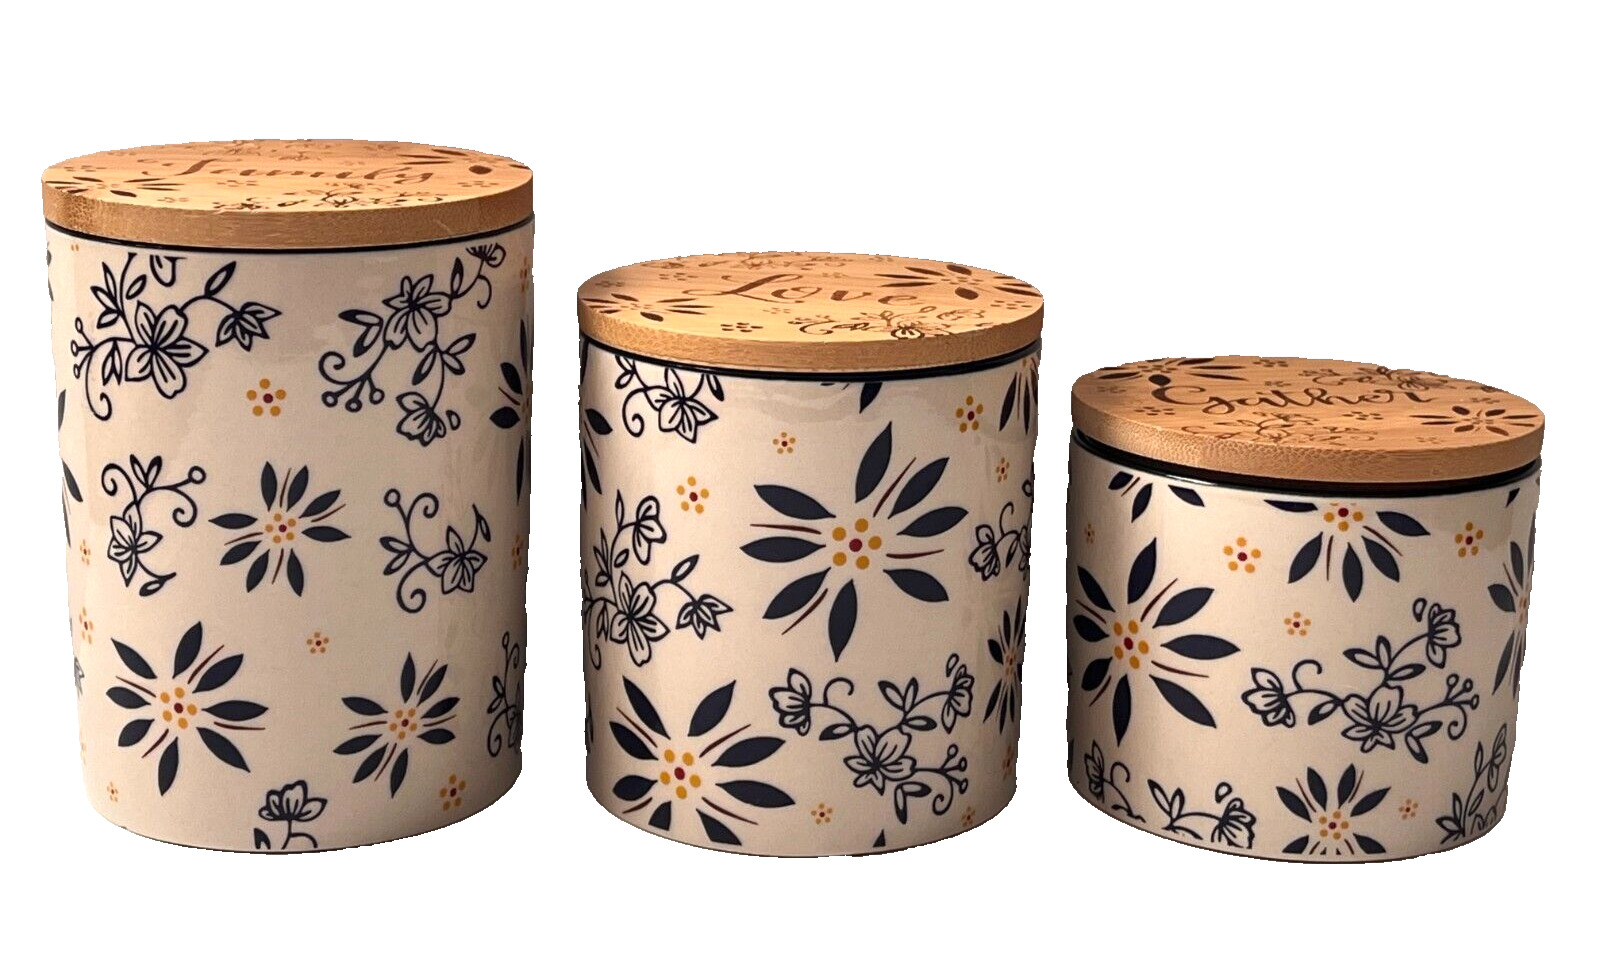 Set of 3 Temp-tations by Tara Old World Pattern Ceramic Canisters w/ Bamboo Lids